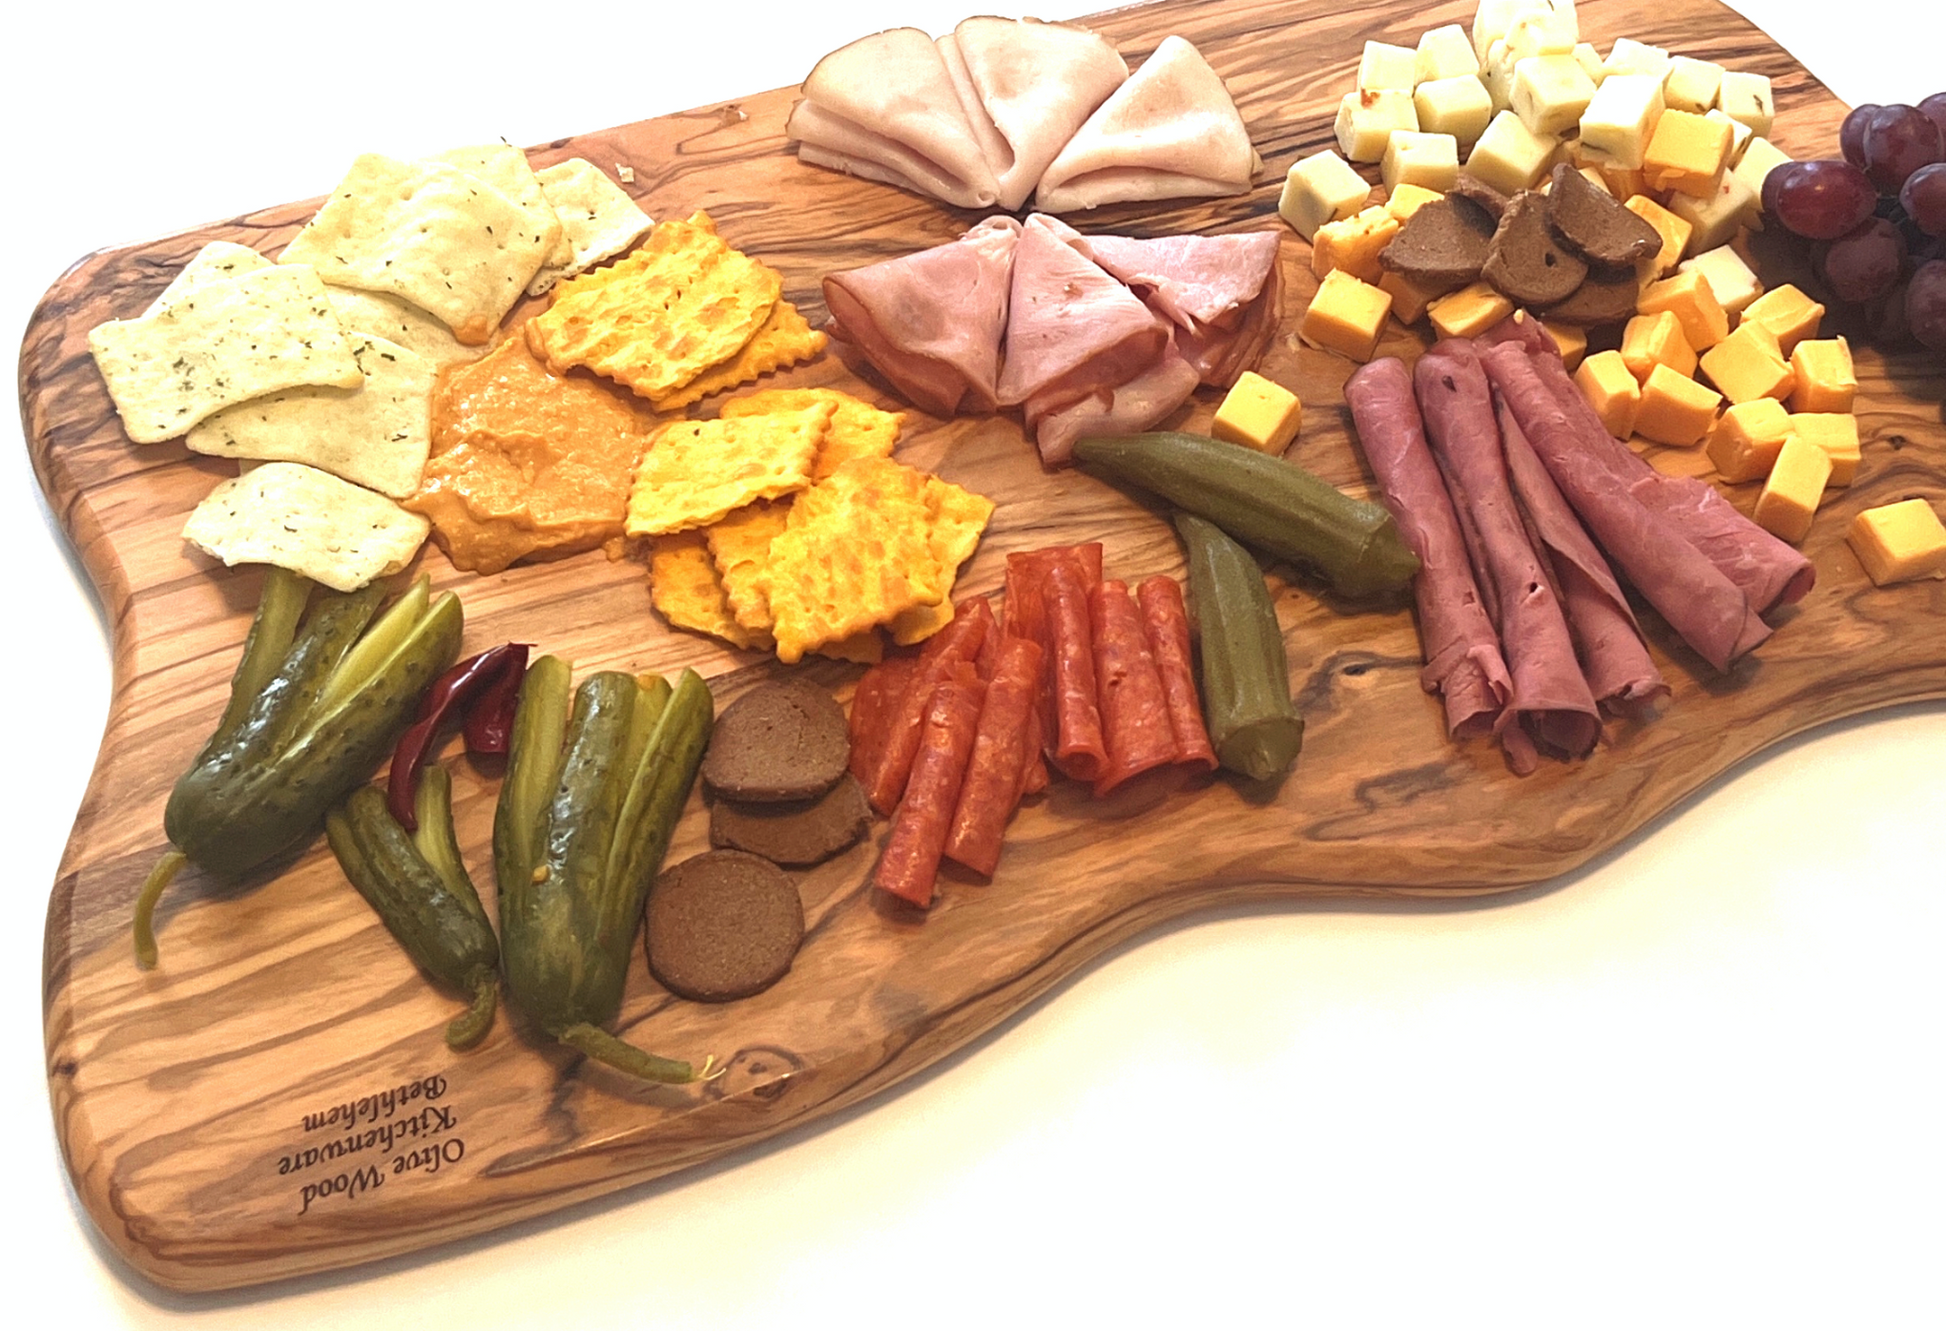 16 Paipo SURVBOARD Cheese Platter, Serving Board, Cutting Board - Santa  Barbara Cutting Board Company